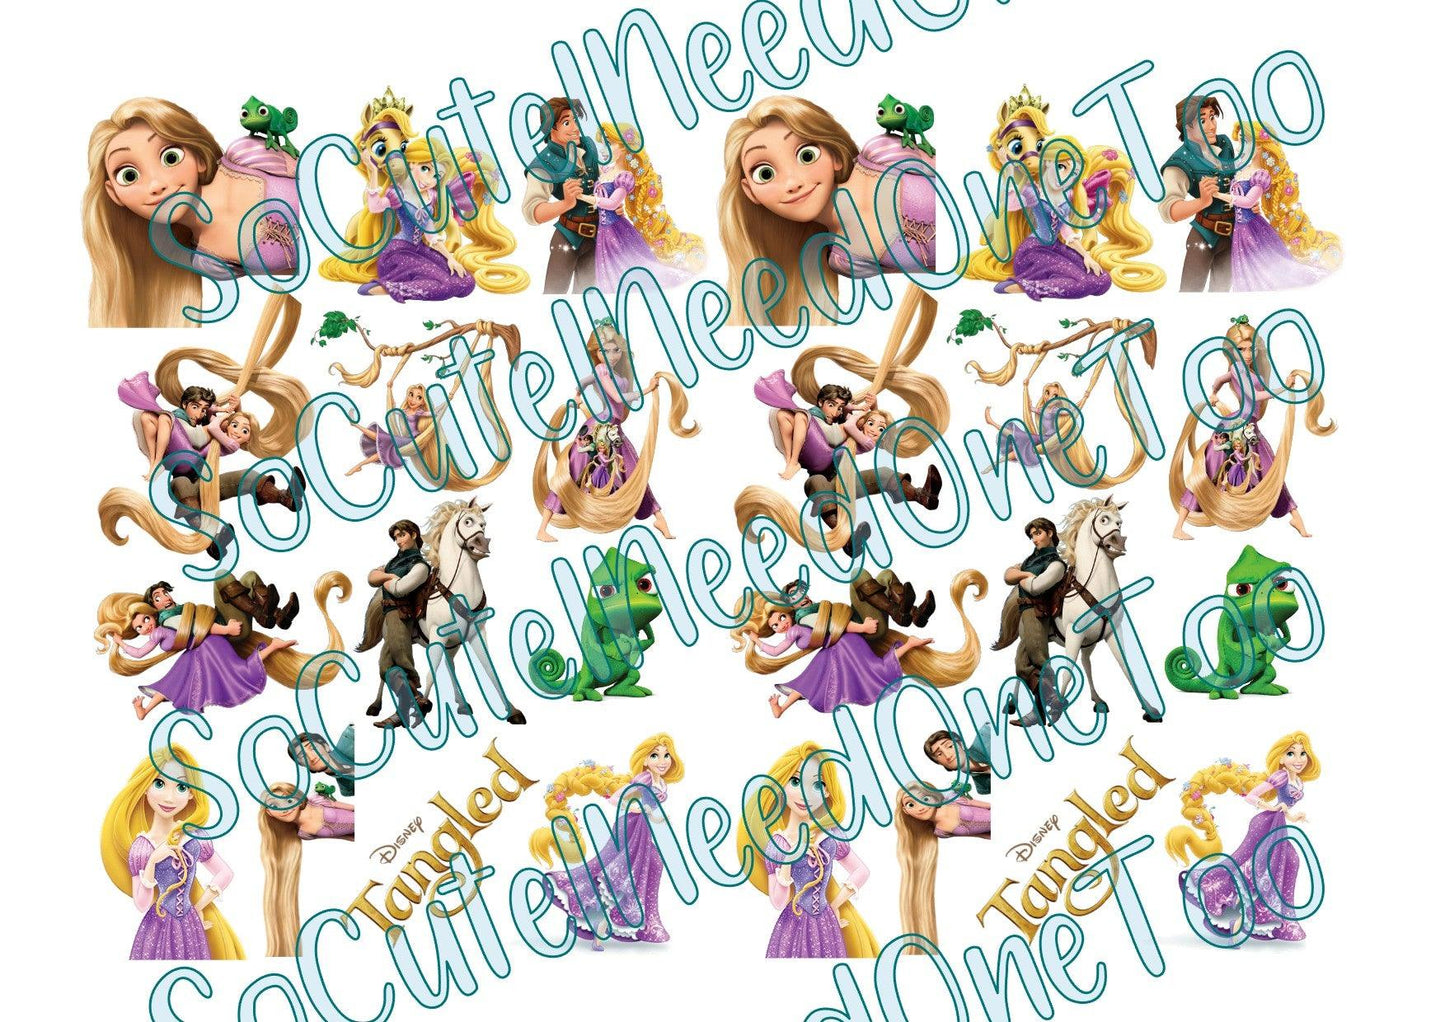 Tangled Smaller Images (KIDS CUPS) on Clear/White Waterslide Paper Ready To Use - SoCuteINeedOneToo